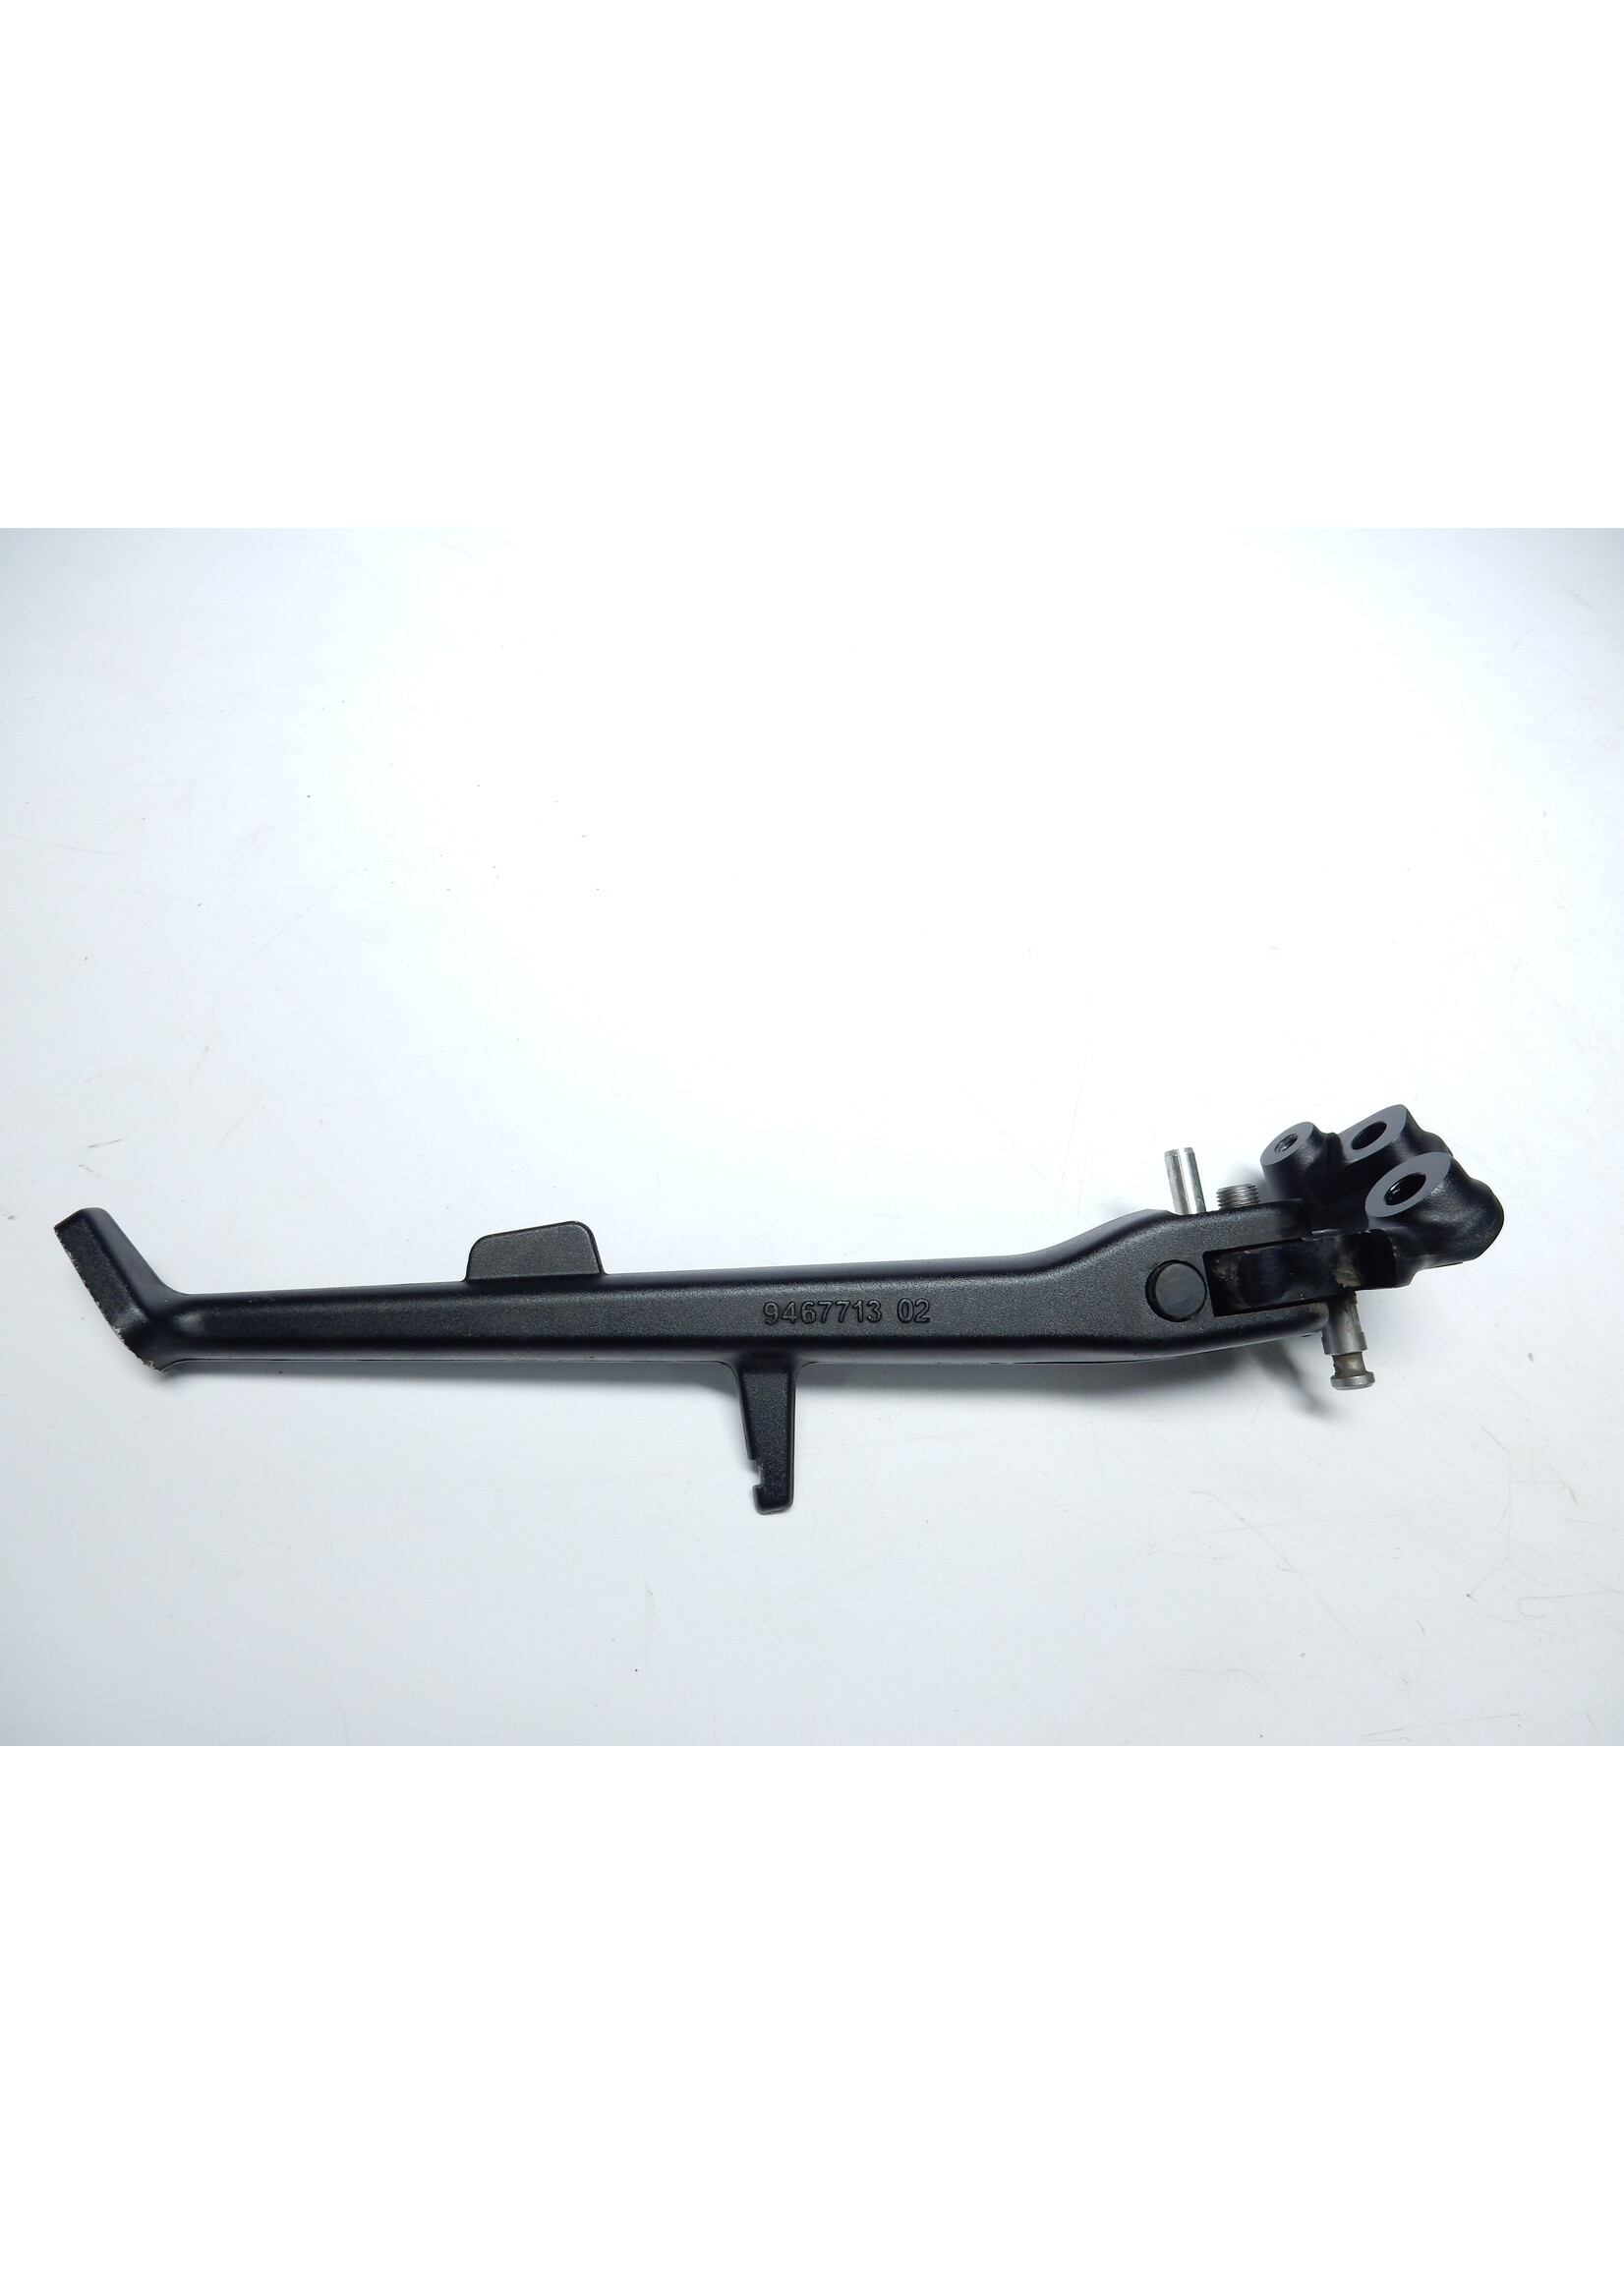 BMW BMW S 1000 R Side stand / Supporting bracket f side stand / 46539467713 / 46538373657